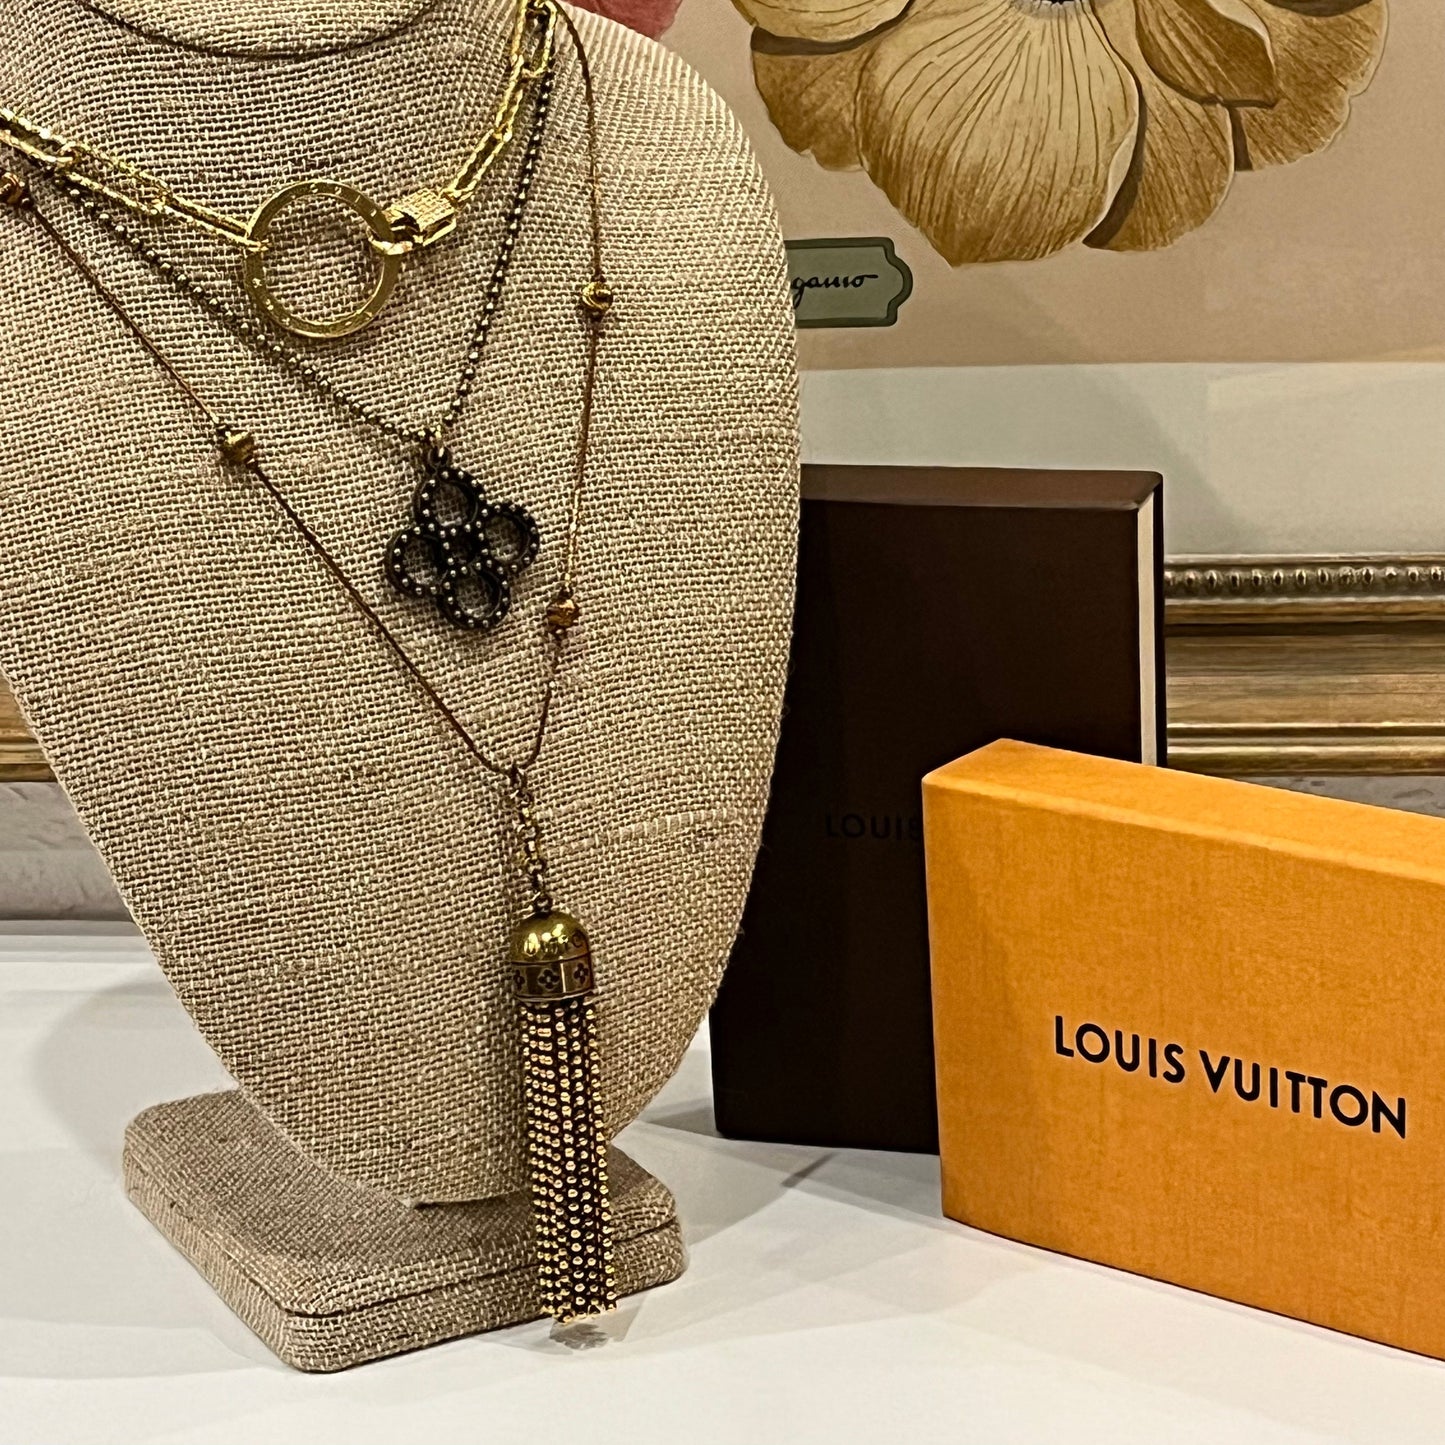 Statement Choker Custom One of a Kind Louis Vuitton Gold Key Ring on Chain